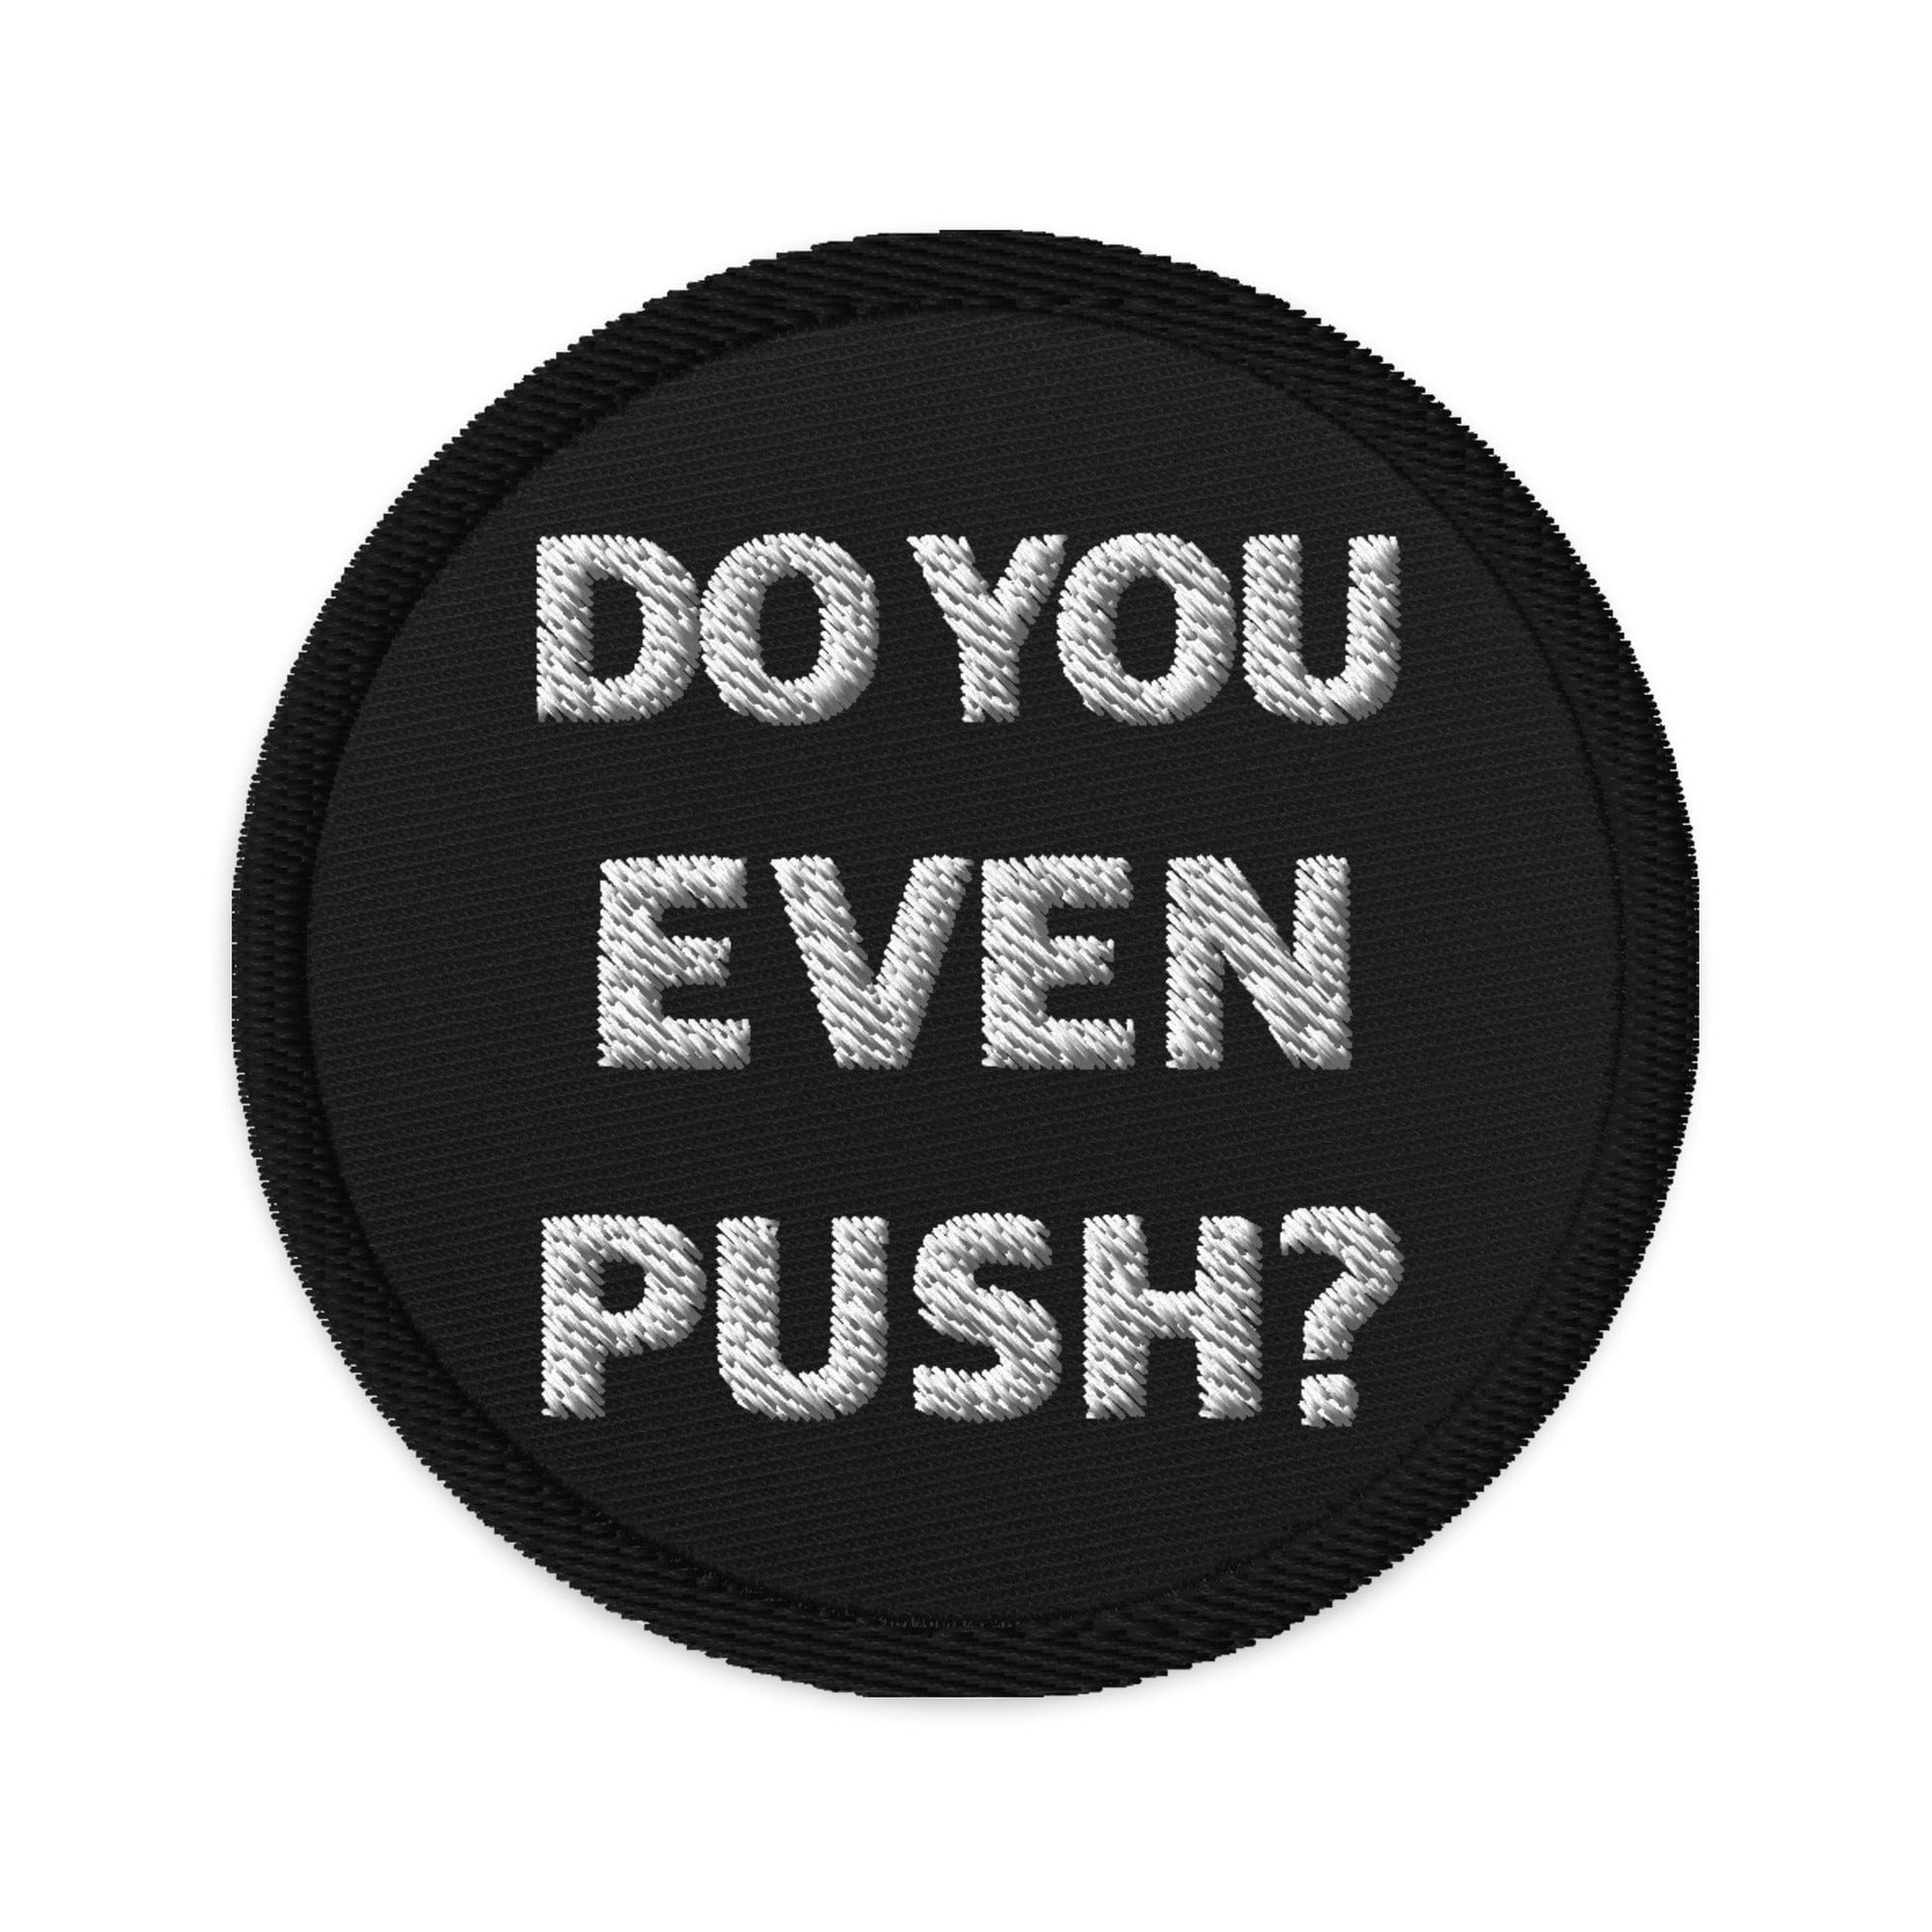 Production Apparel Do You Even Push Patch